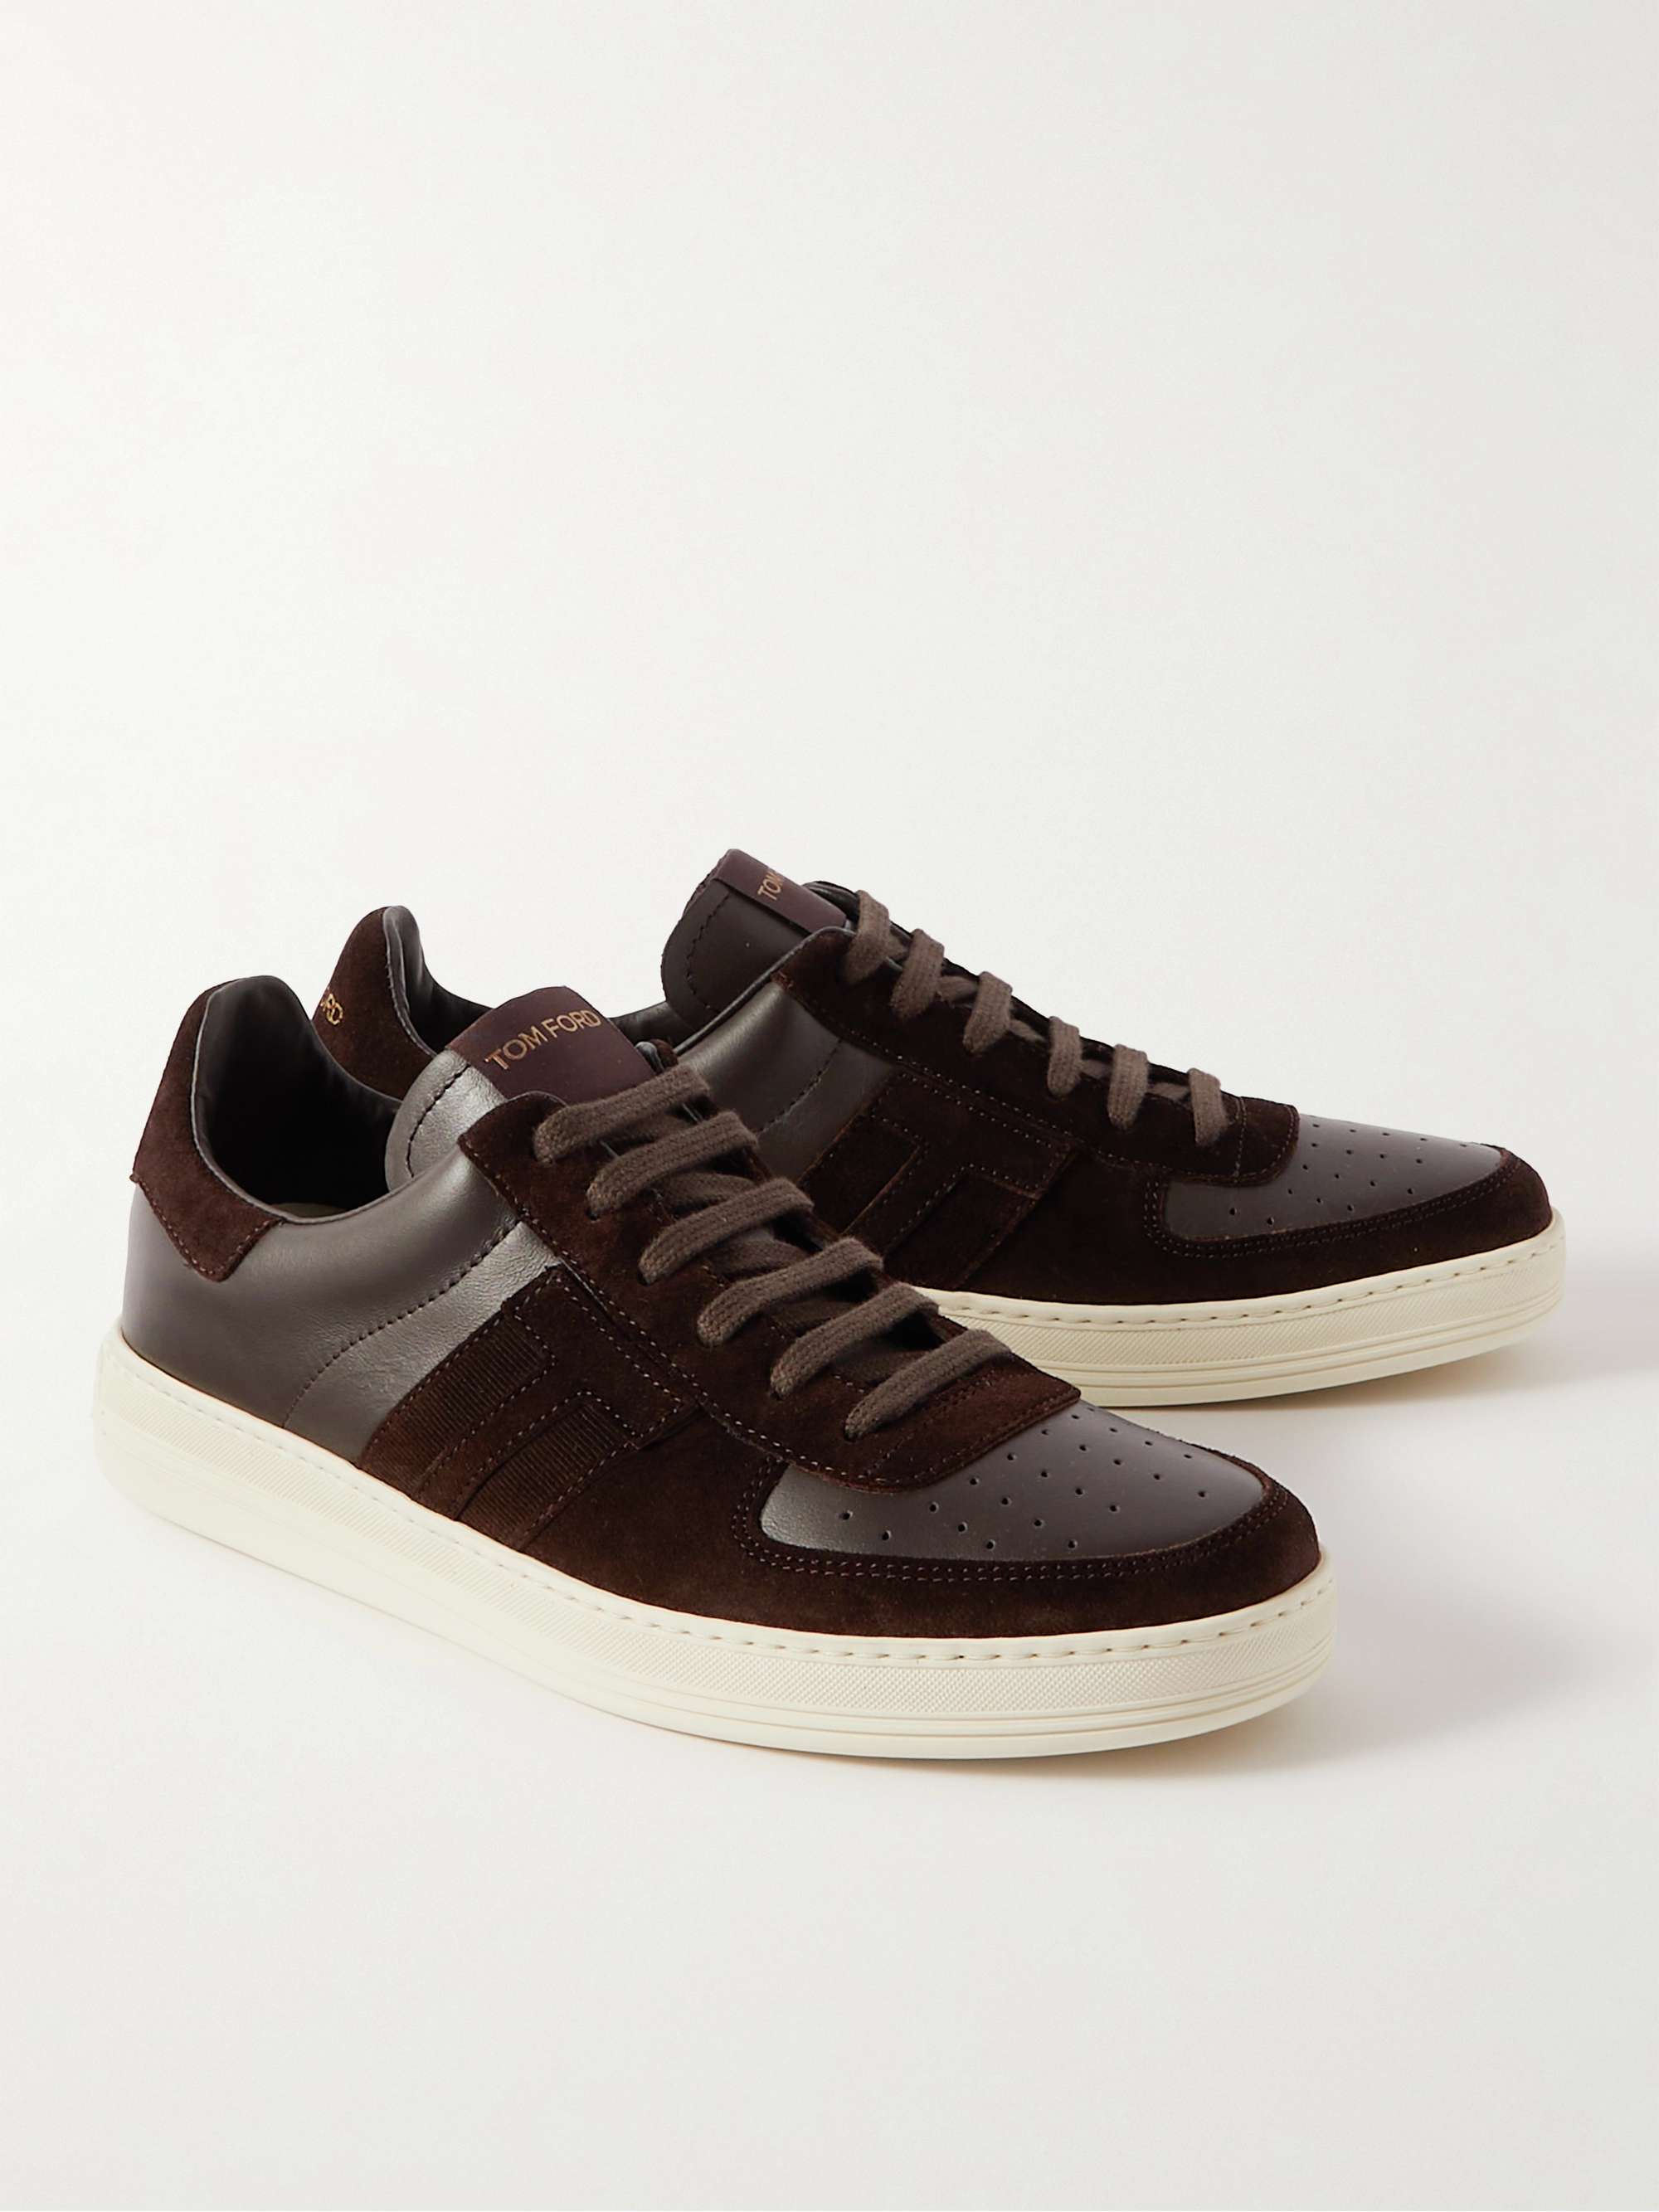 TOM FORD Radcliffe Suede and Leather Sneakers for Men | MR PORTER